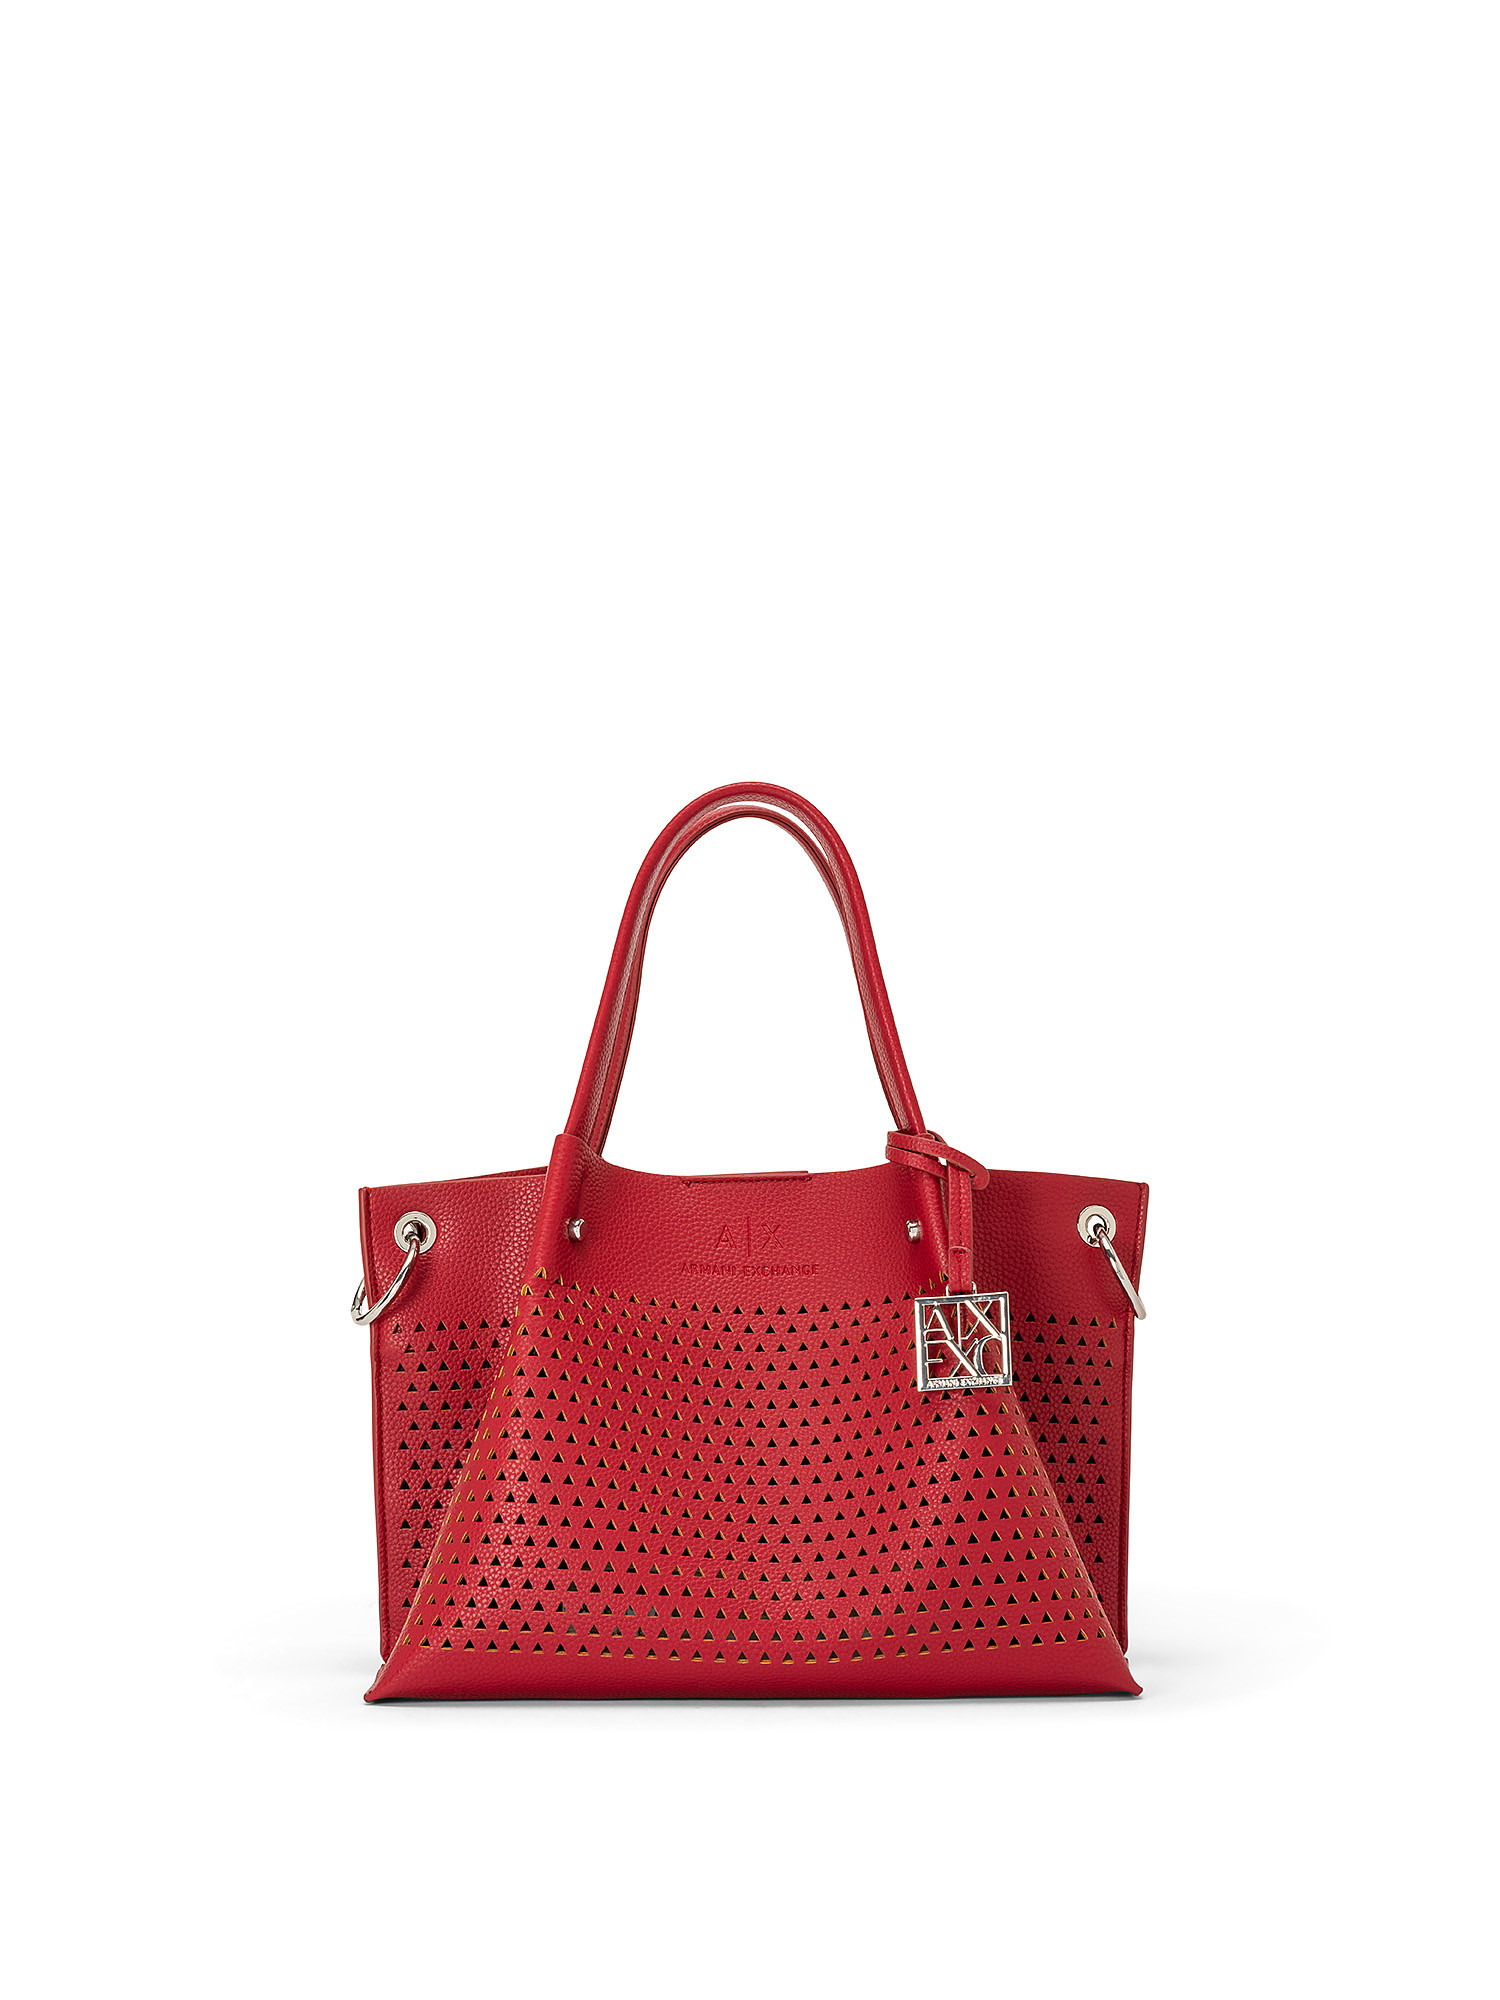 Shopping bag con cerniera superiore, Rosso, large image number 0